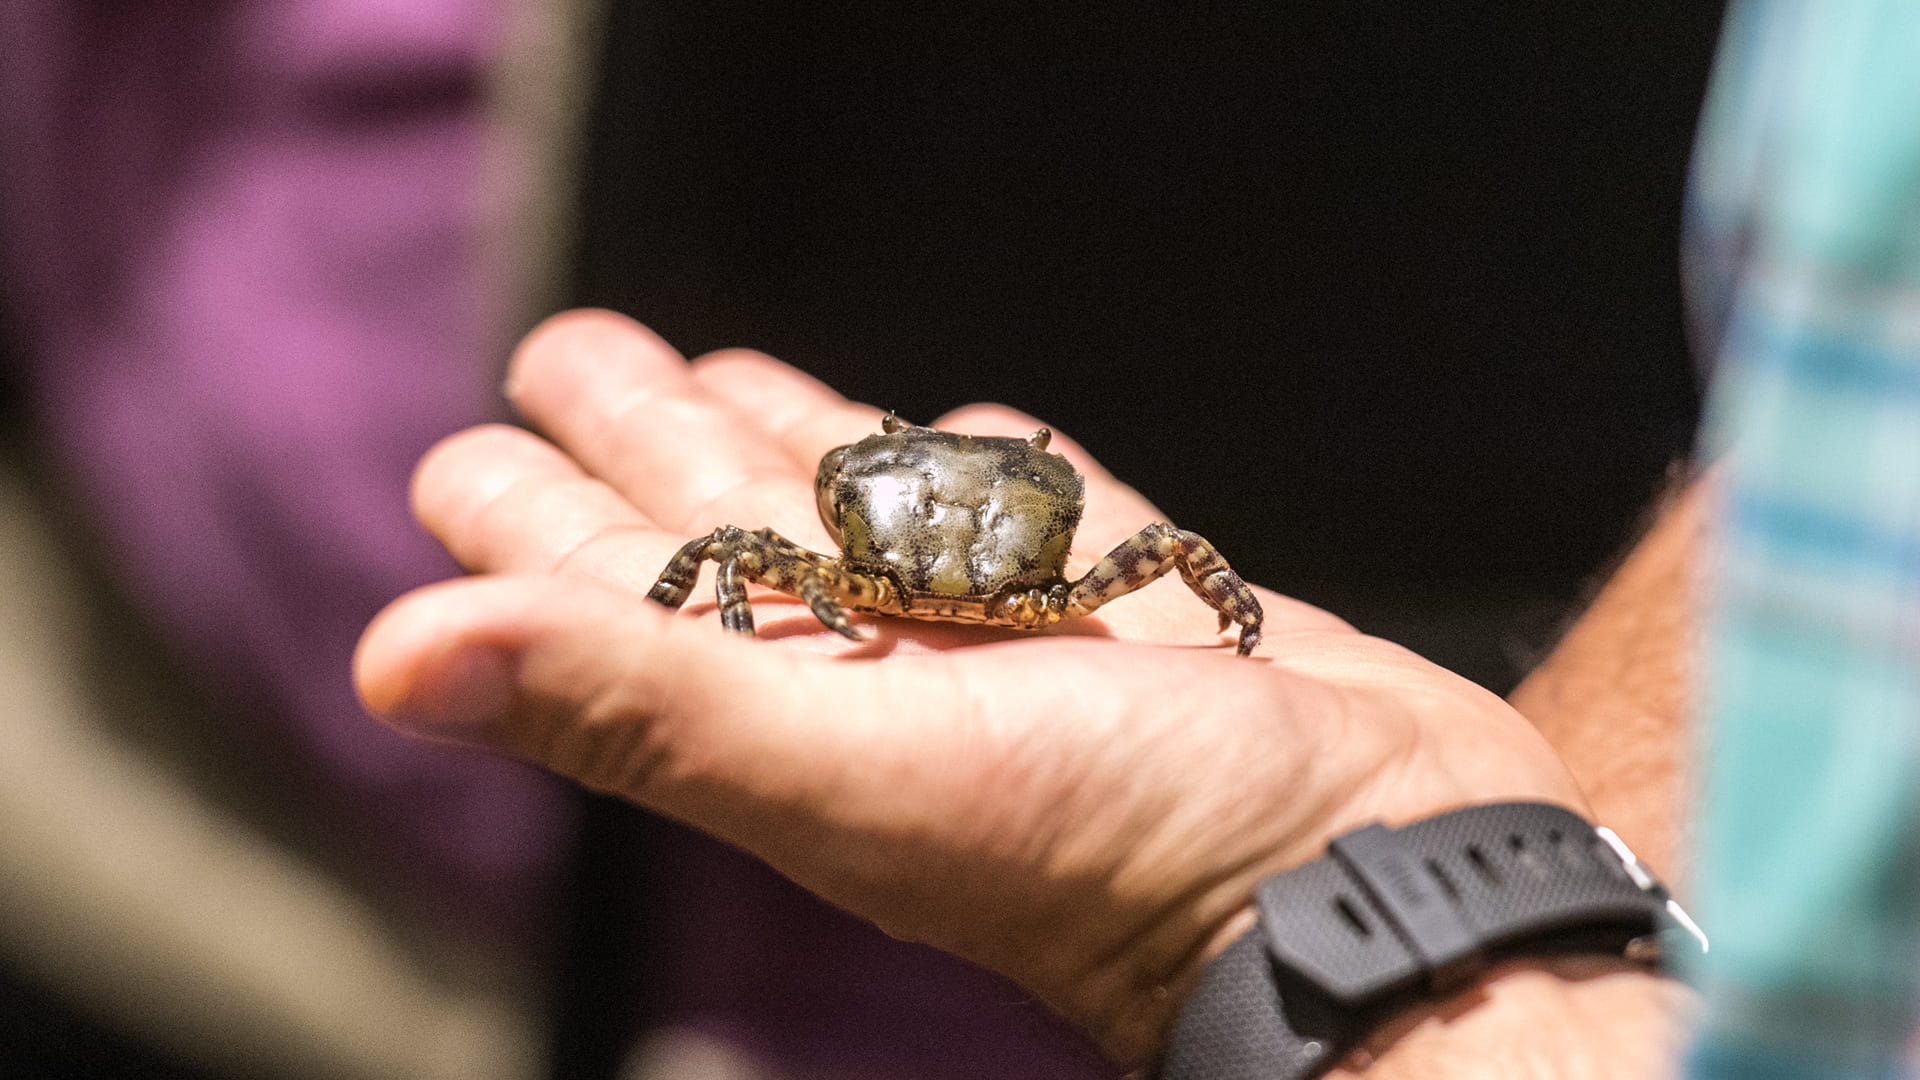 The invasive Asian crab on display at the Sustainable Seafood Symposium.